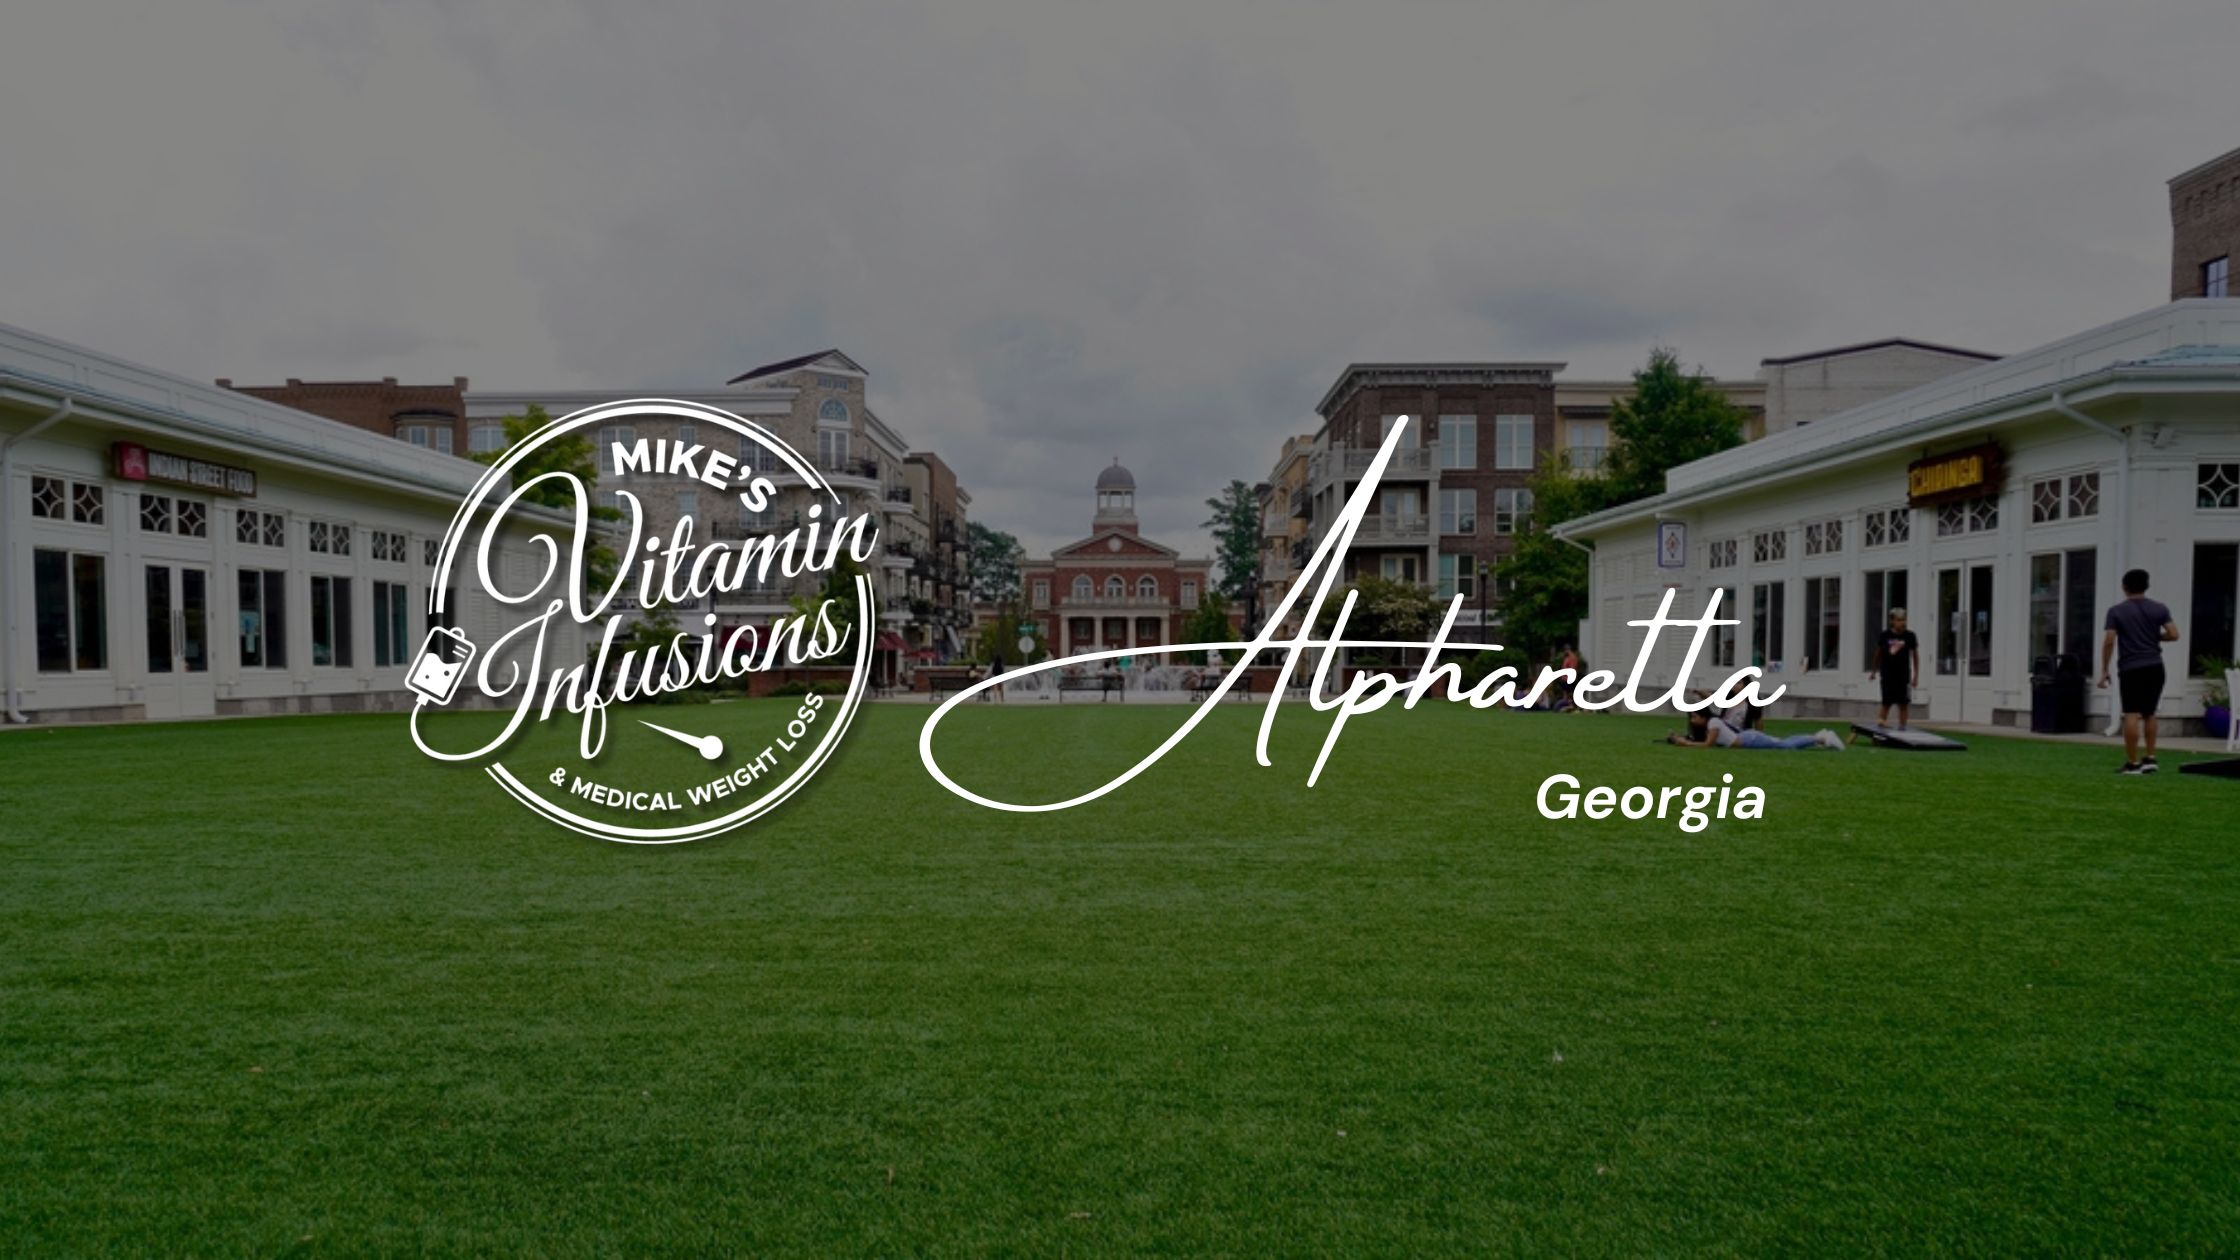 Image of a town in Alpharetta Georgia with the mike's vitamin infusions logo